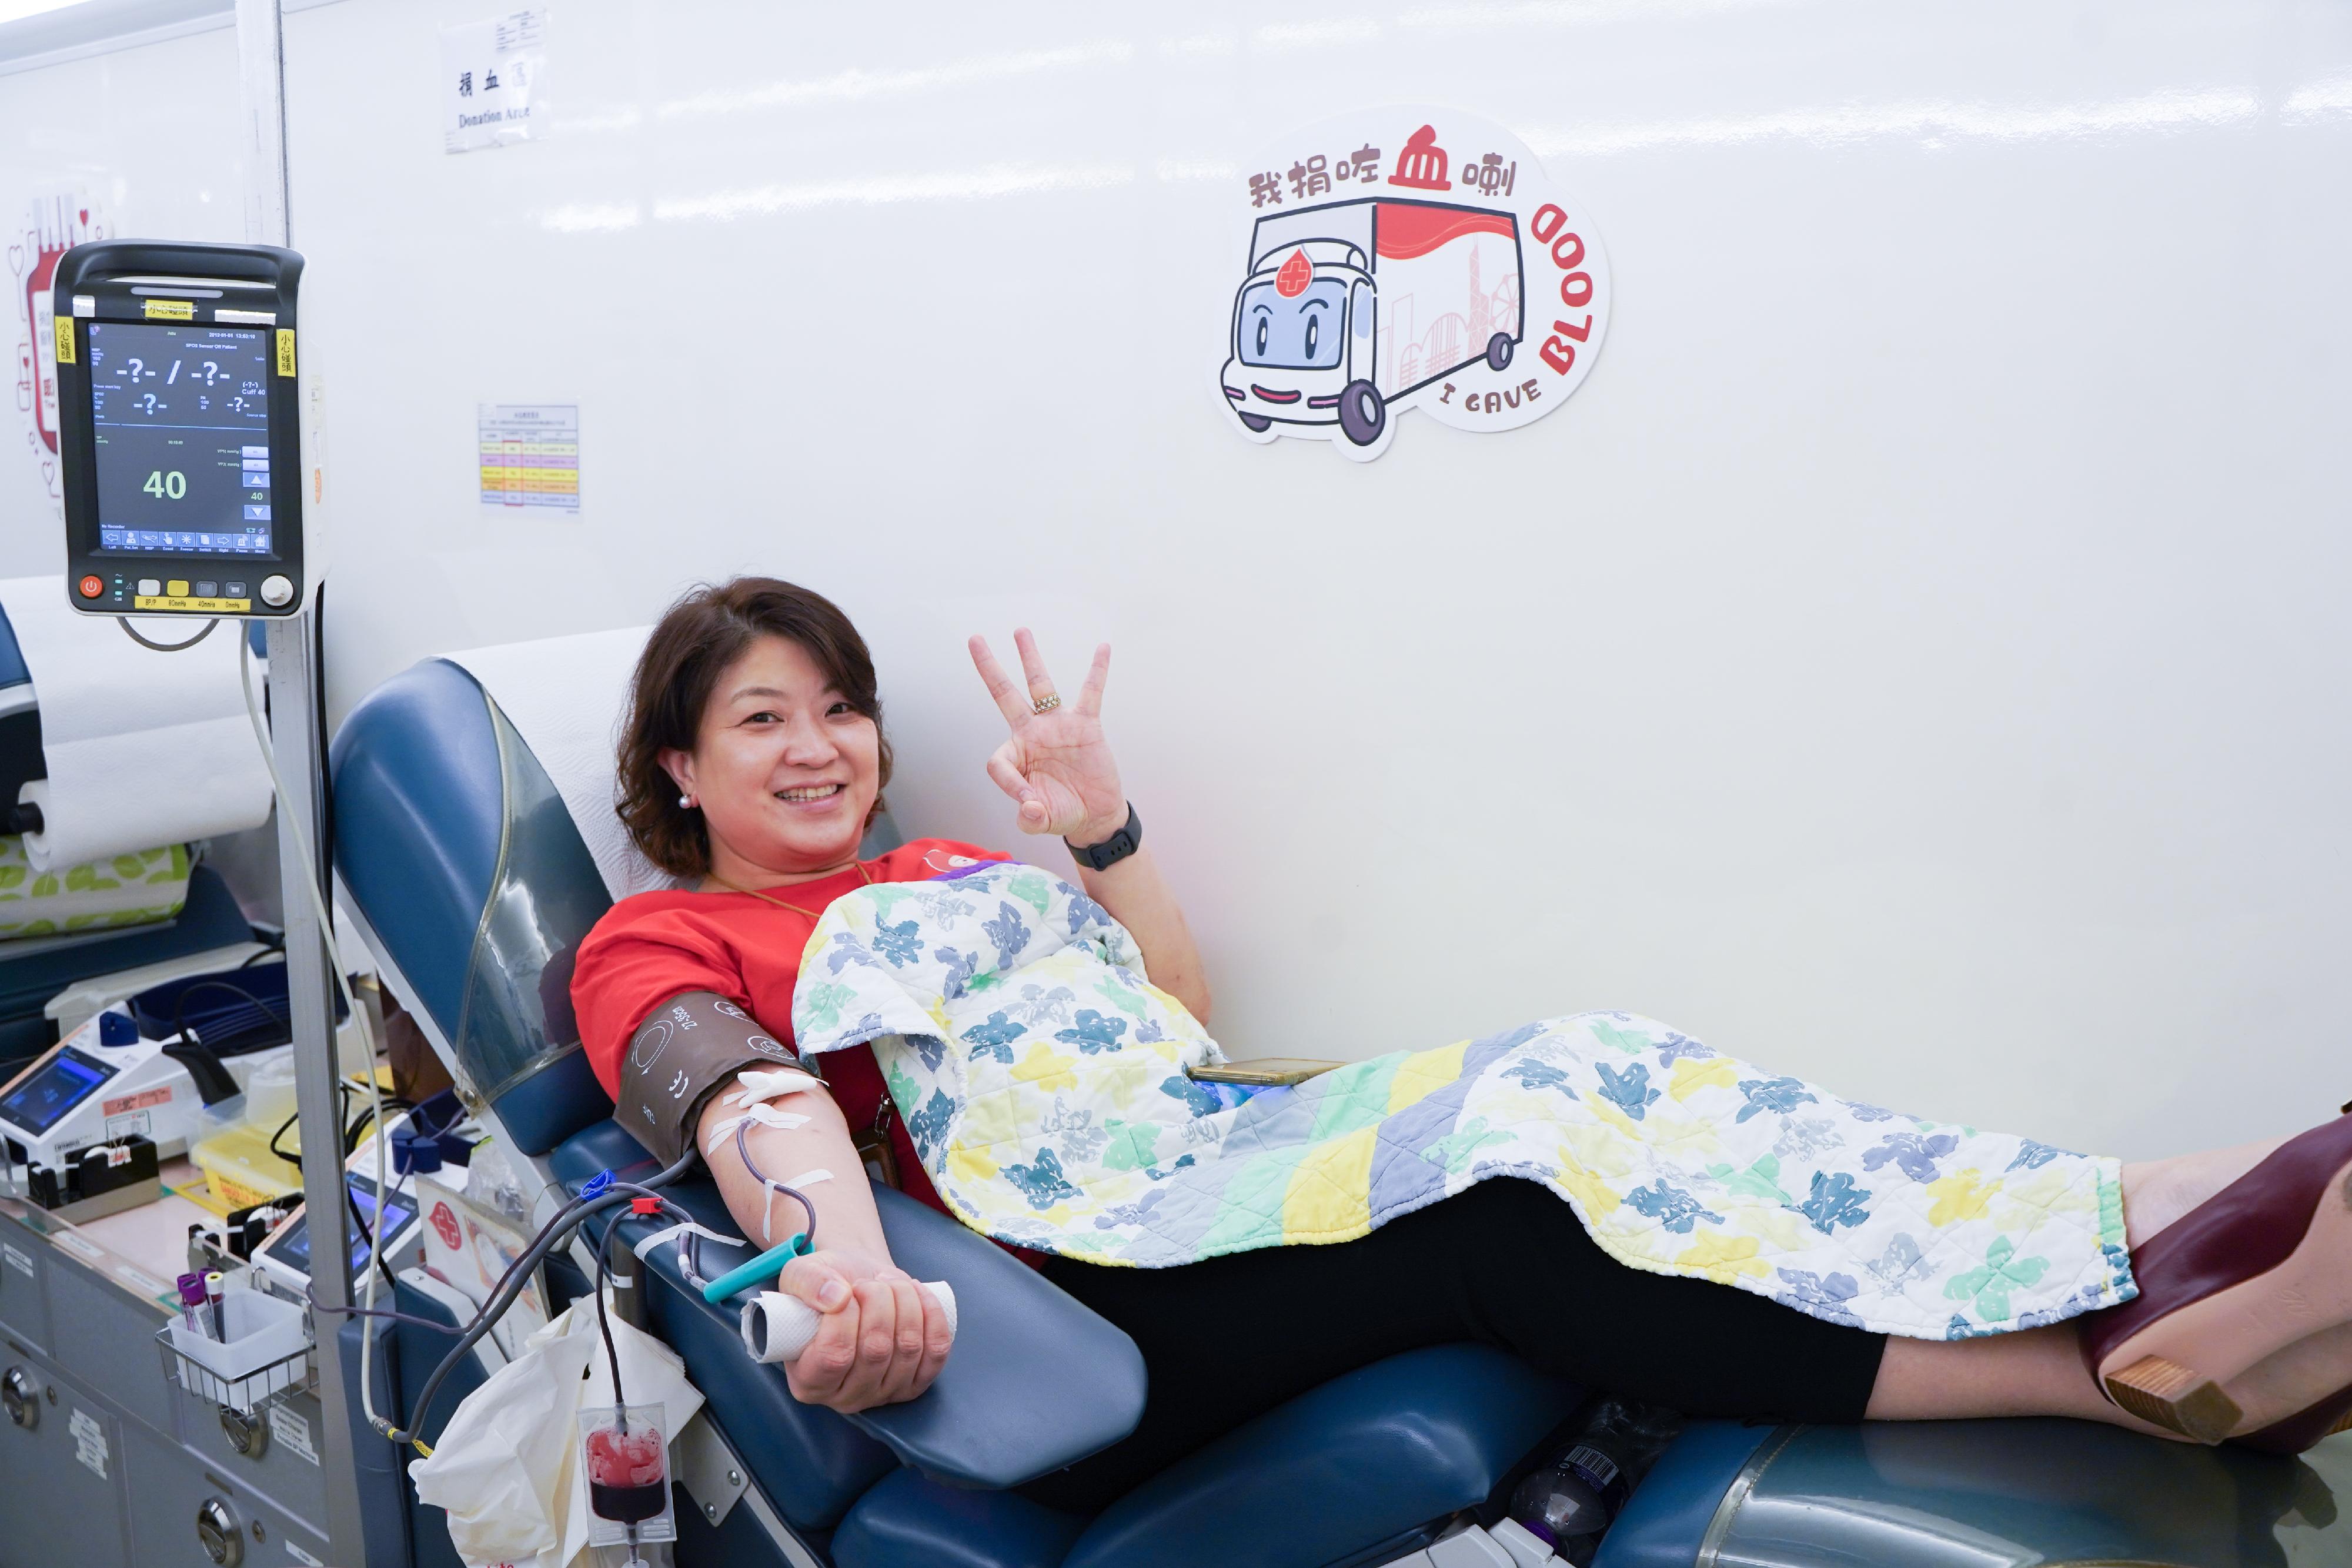 The Under Secretary for Health, Dr Libby Lee, donates blood on the mobile blood donation vehicle of the Hong Kong Red Cross Blood Transfusion Service (BTS) parked at the Central Government Offices today (August 14) to show support for blood donation drives and efforts of the BTS.